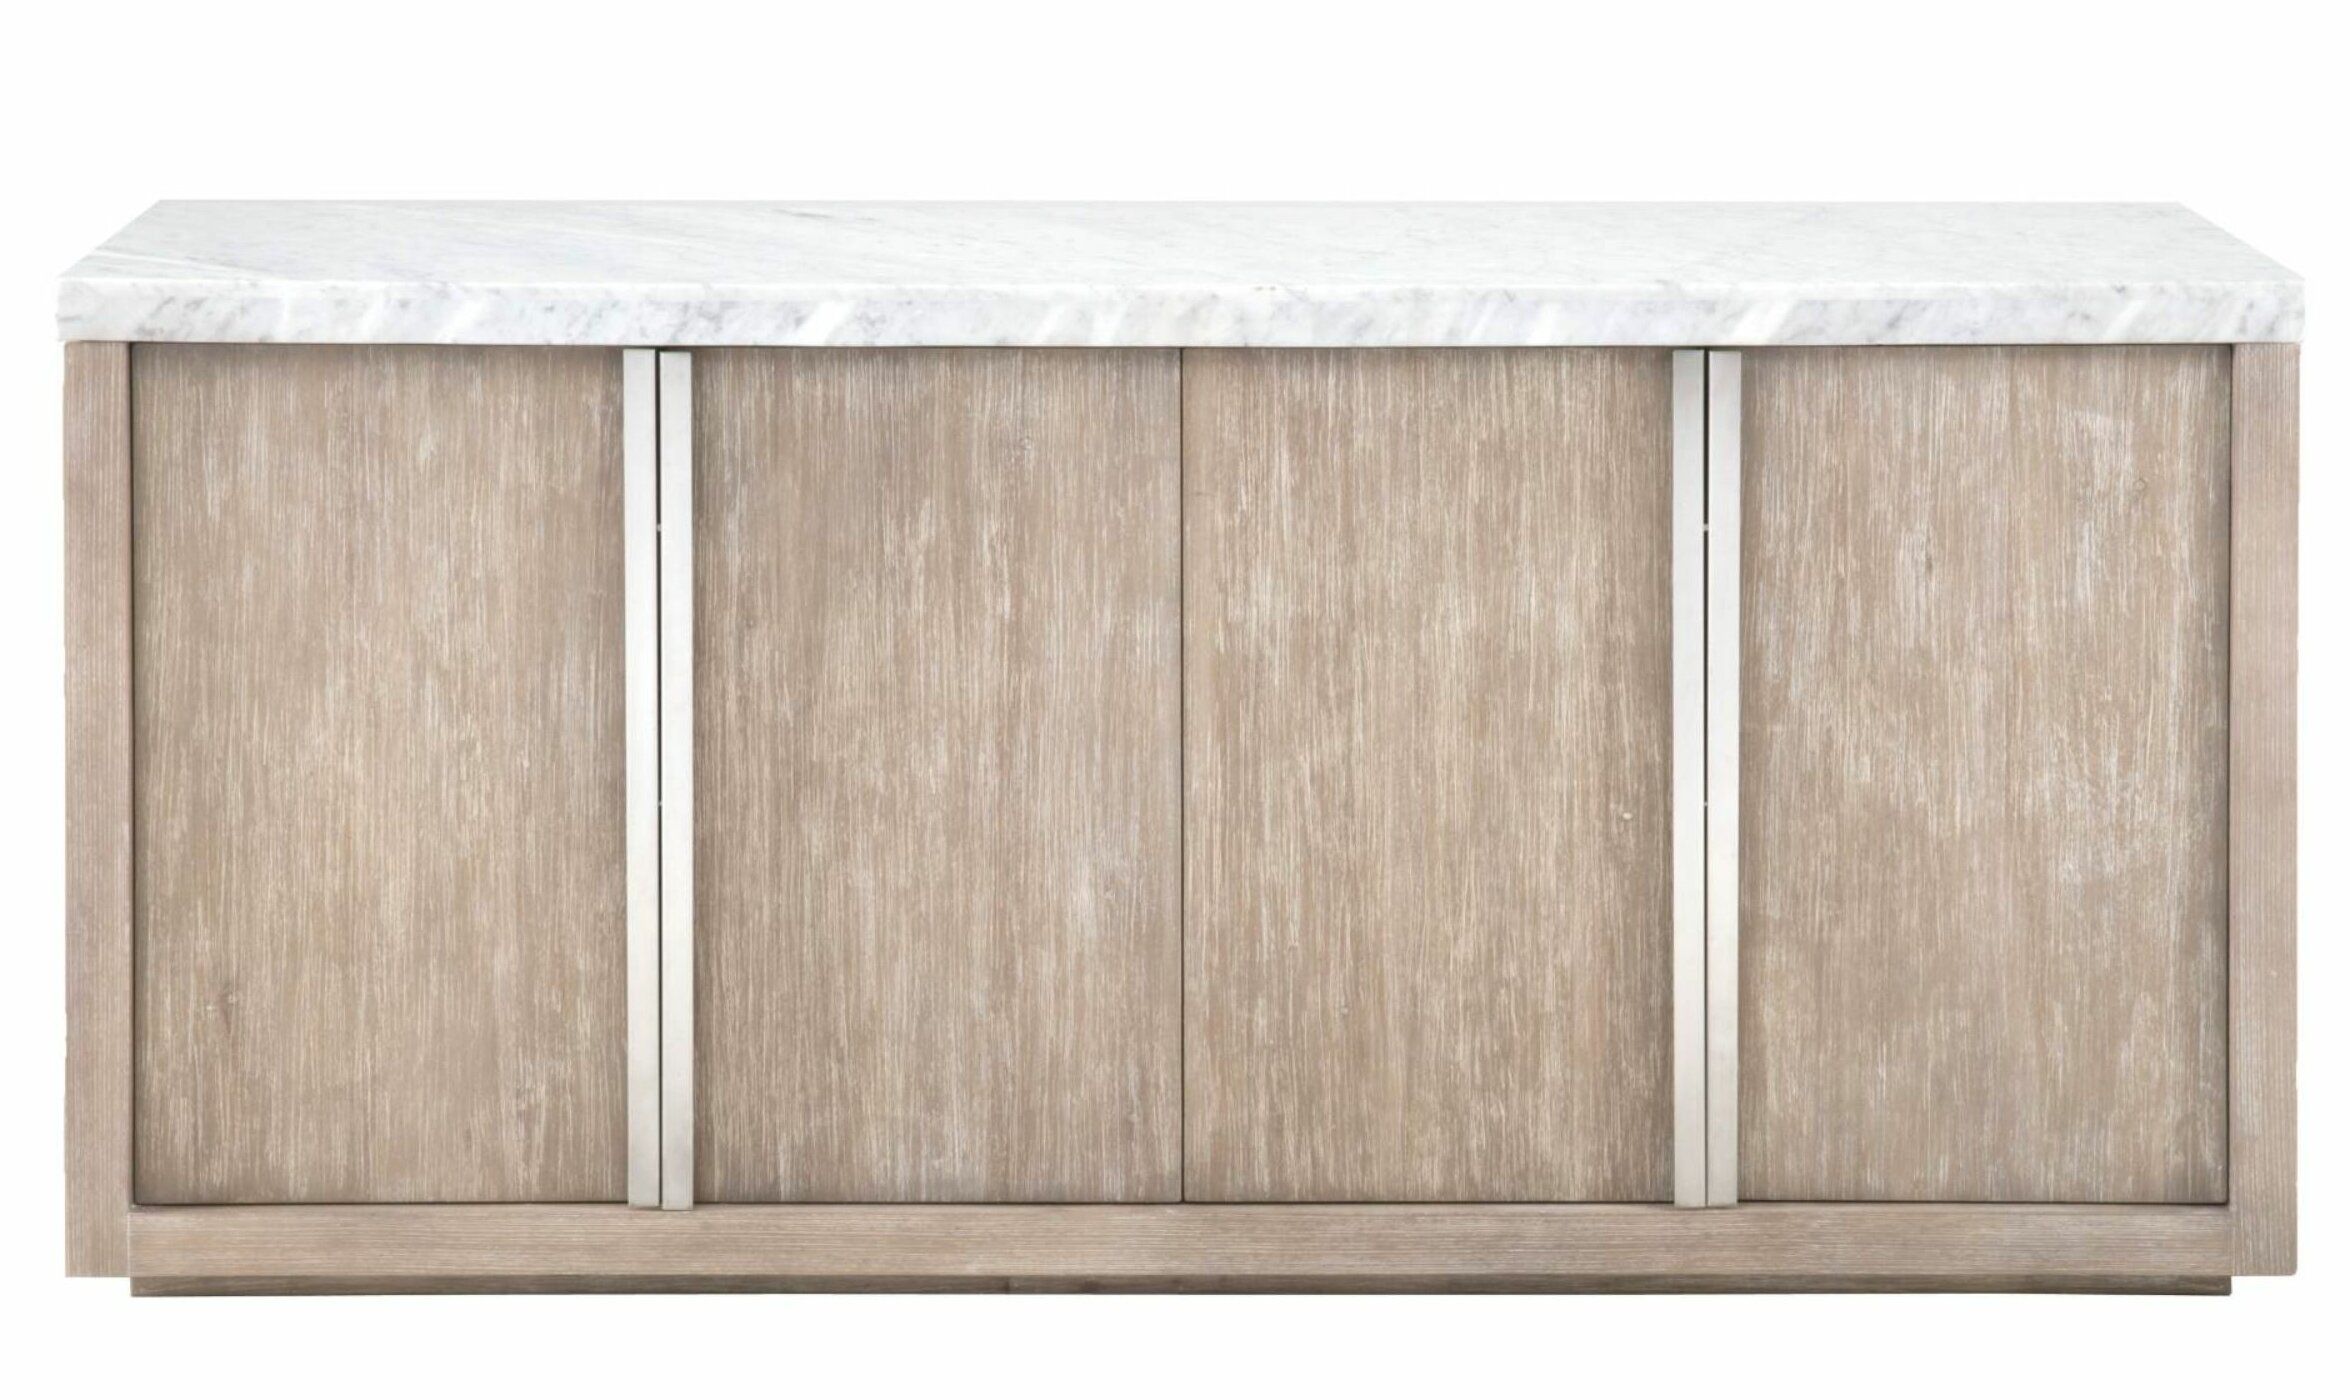 Juhasz Wooden Sideboard Within Womack Sideboards (View 5 of 30)